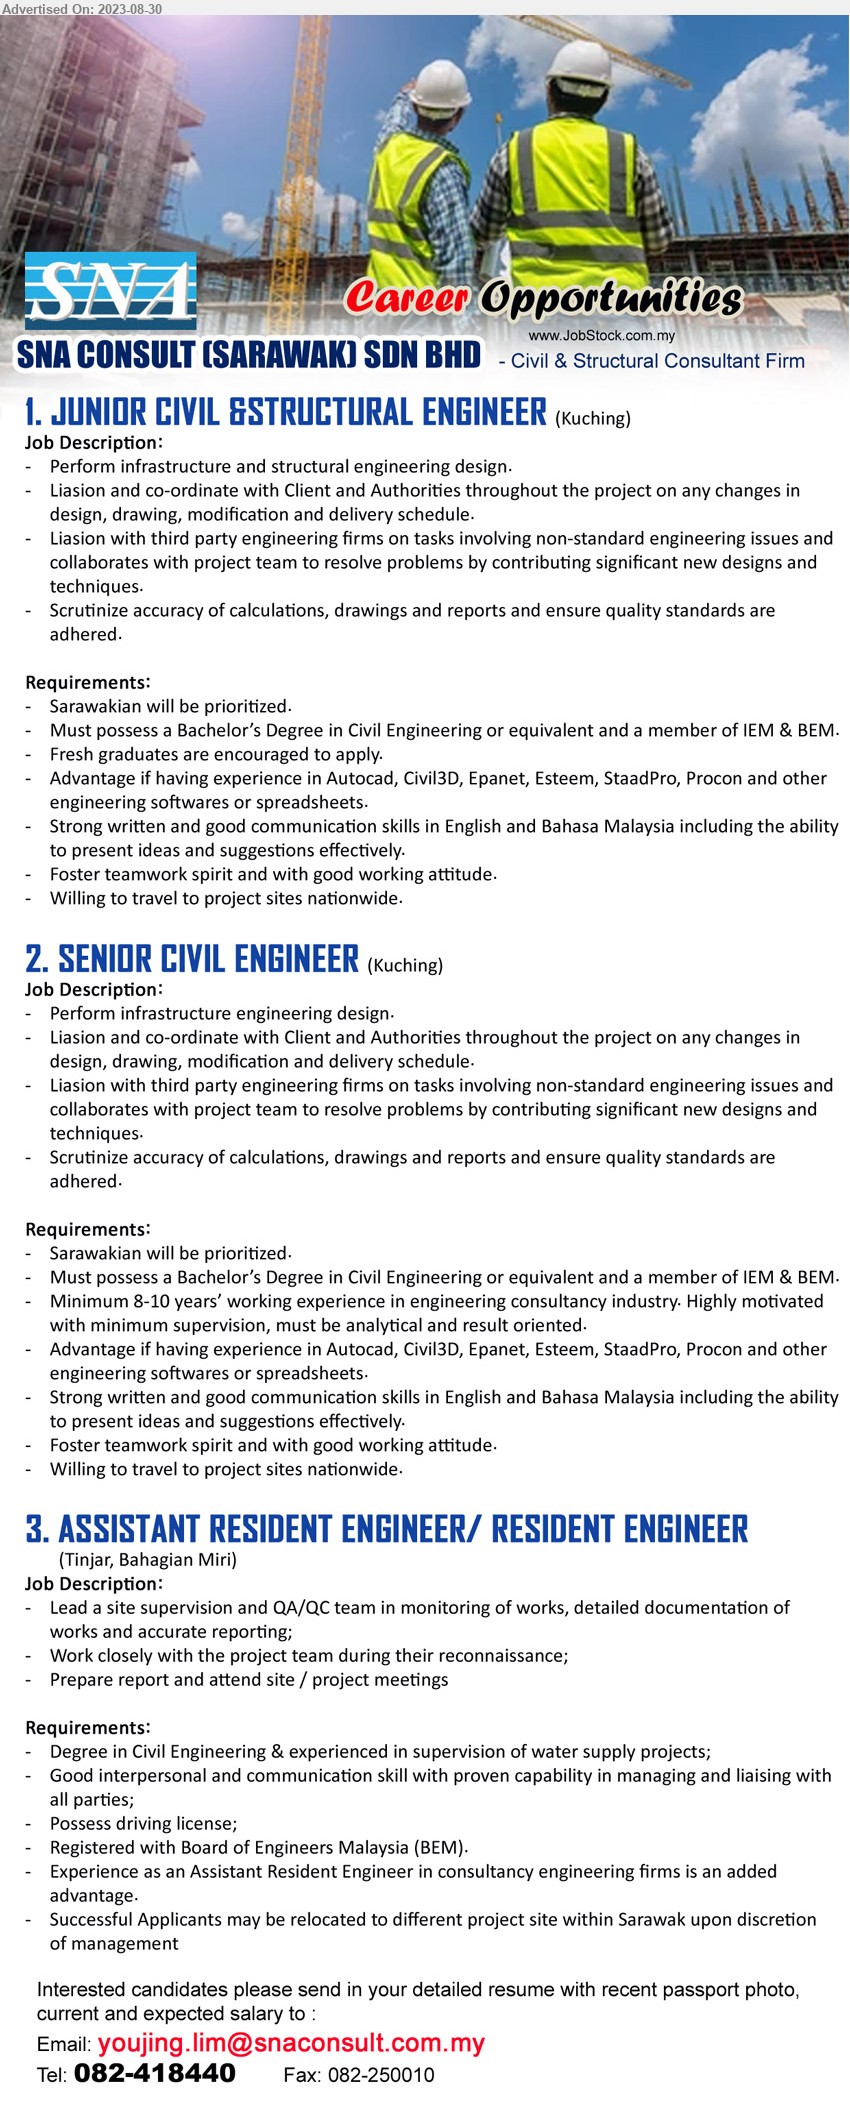 SNA CONSULT (SARAWAK) SDN BHD - 1. JUNIOR CIVIL &STRUCTURAL ENGINEER (Kuching), Bachelor’s Degree in Civil Engineering or equivalent and a member of IEM & BEM.,...
2. SENIOR CIVIL ENGINEER (Kuching),  Bachelor’s Degree in Civil Engineering or equivalent and a member of IEM & BEM.,...
3. ASSISTANT RESIDENT ENGINEER/ RESIDENT ENGINEER   (Miri), Degree in Civil Engineering & experienced in supervision of water supply projects,...
Call 082-418440 / Email resume to ...